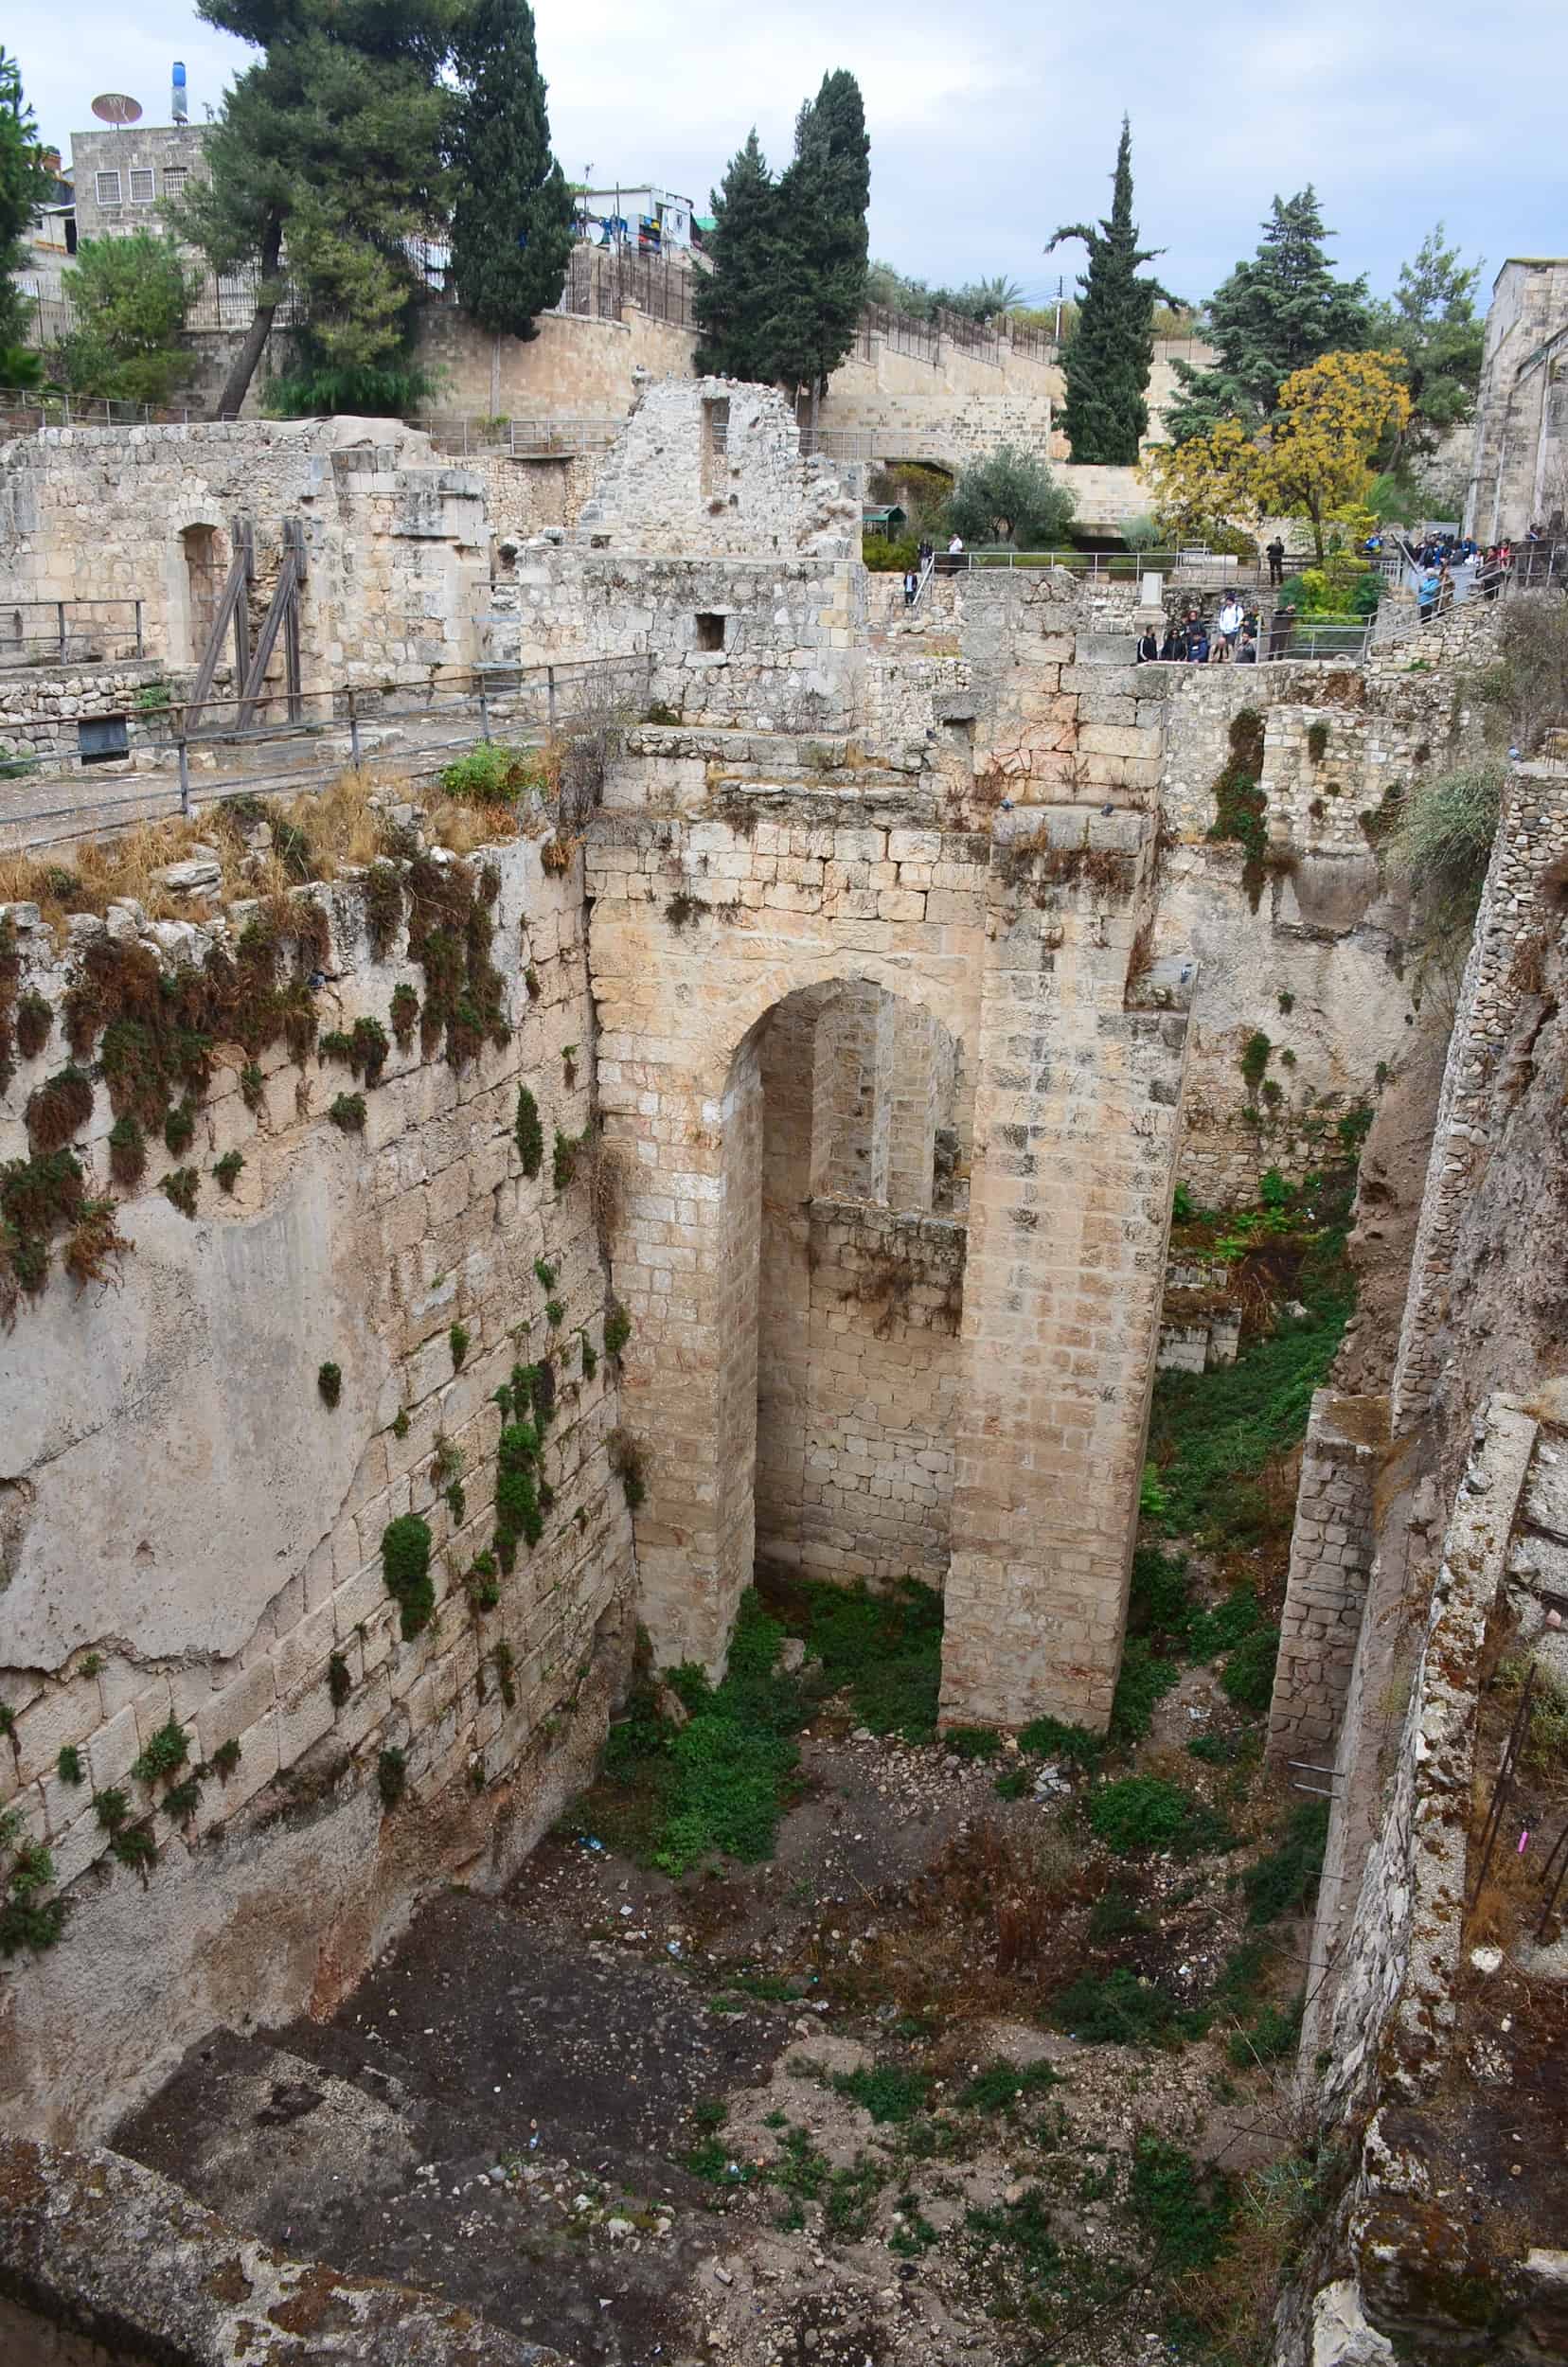 Southern pool at the Pools of Bethesda at the Church of Saint Anne in the Muslim Quarter of Jerusalem